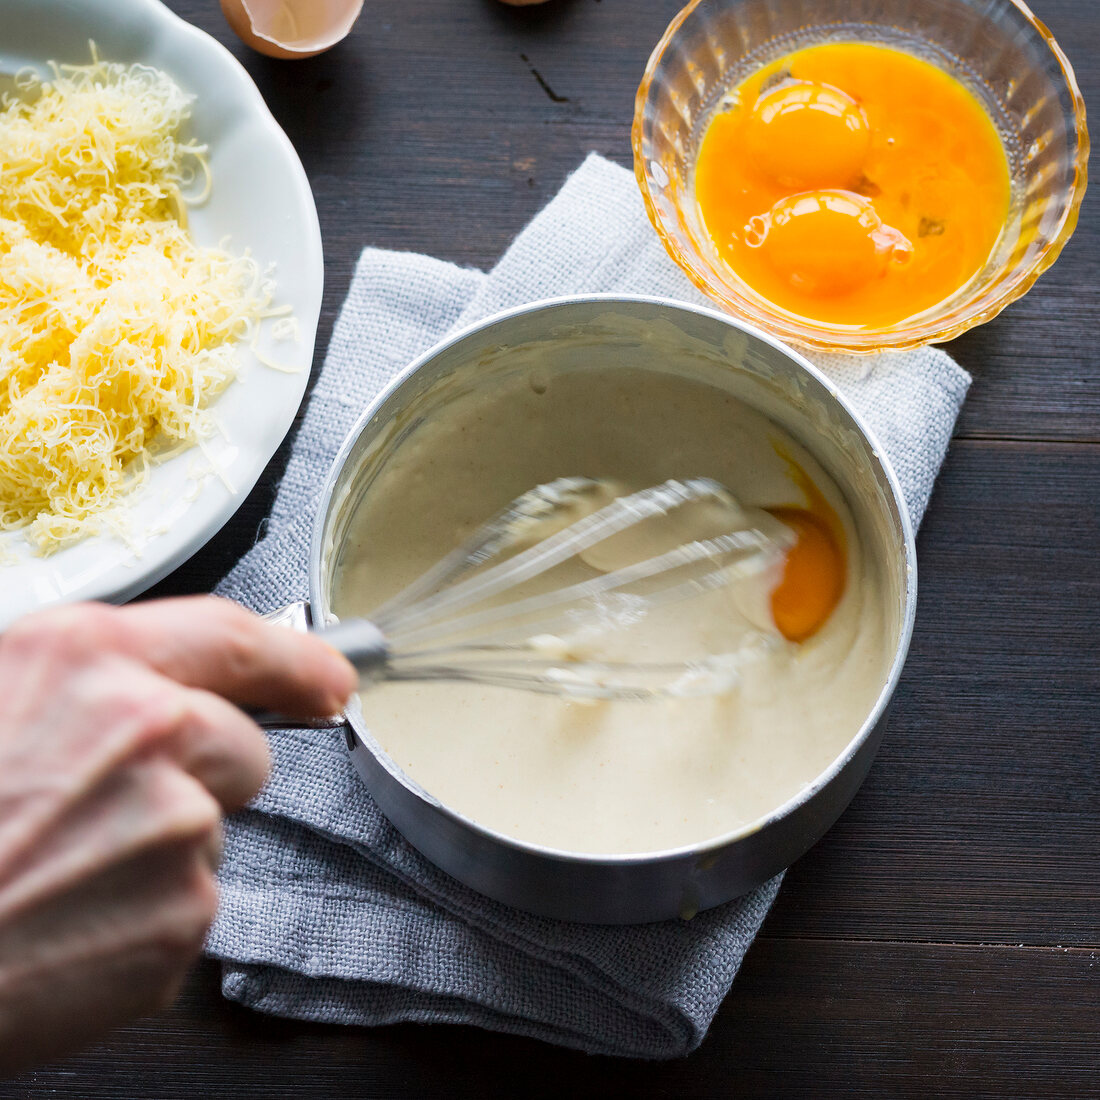 Close-up of man's hand whisking grated cheese and eggs in sauce pan